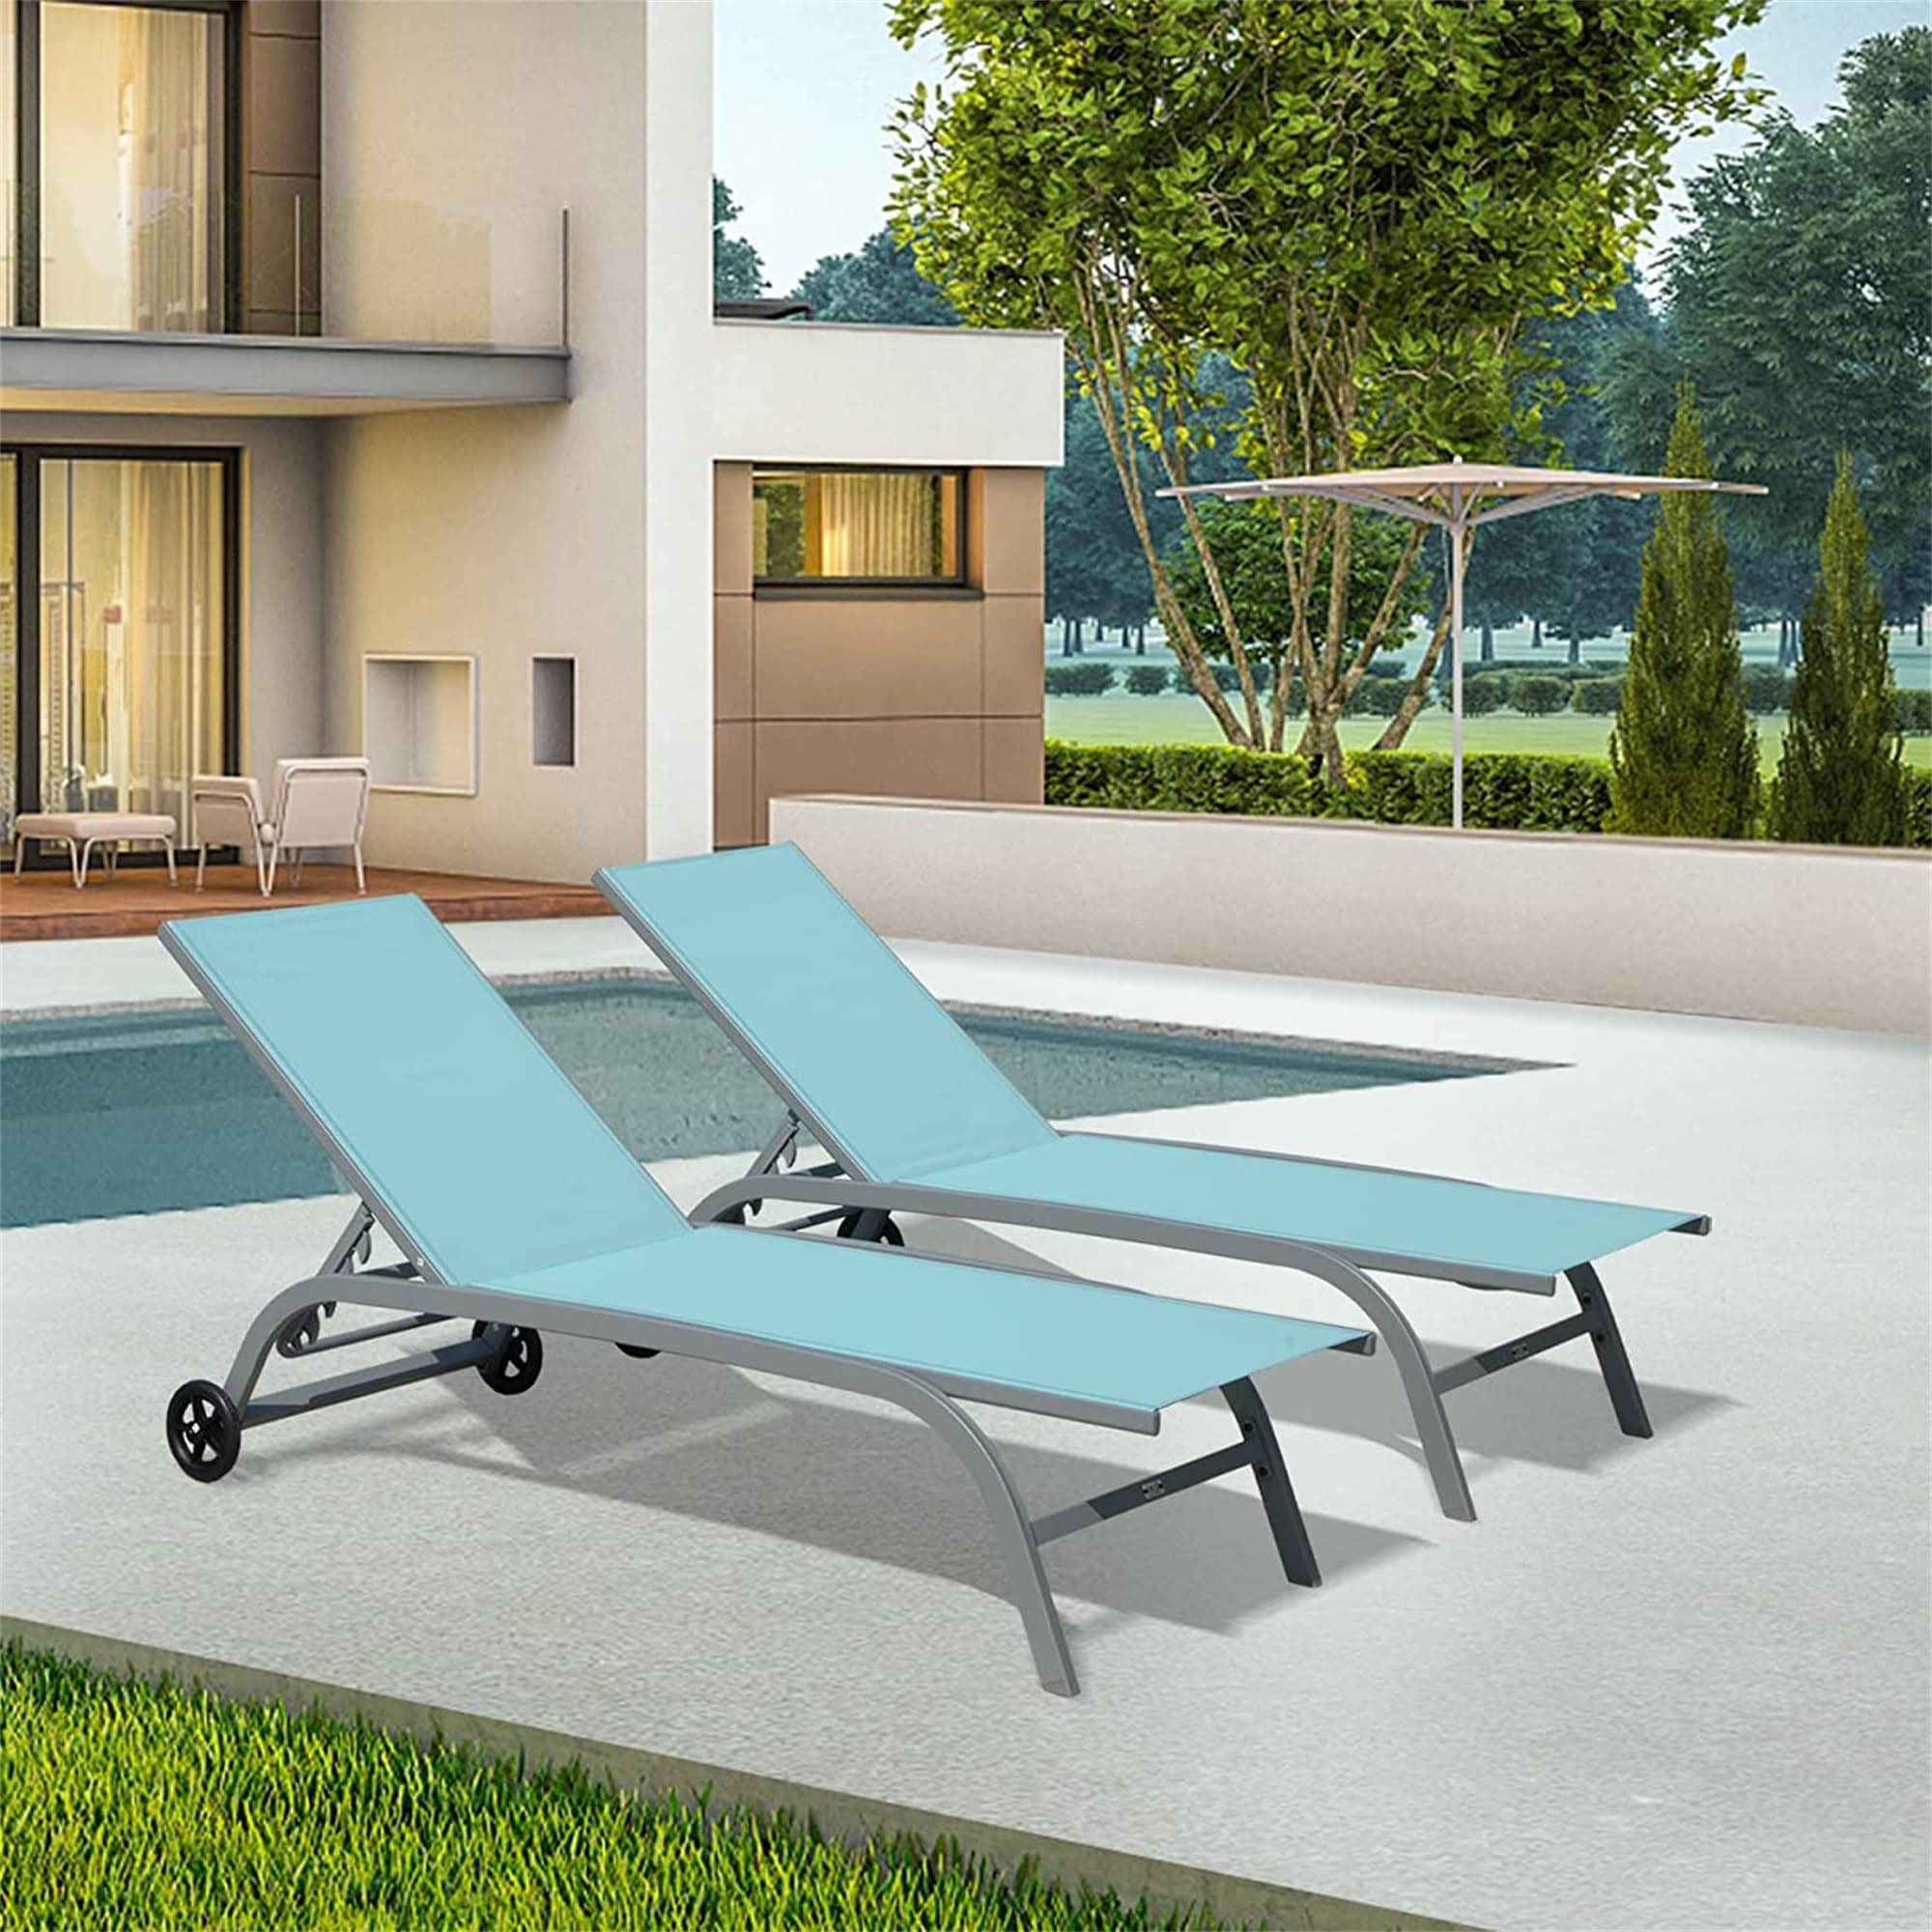 Outdoor Chaise Lounges Set Of 2  Lounge Chairs With Wheels  Summer Pool Recliners With 5 Adjustable Position